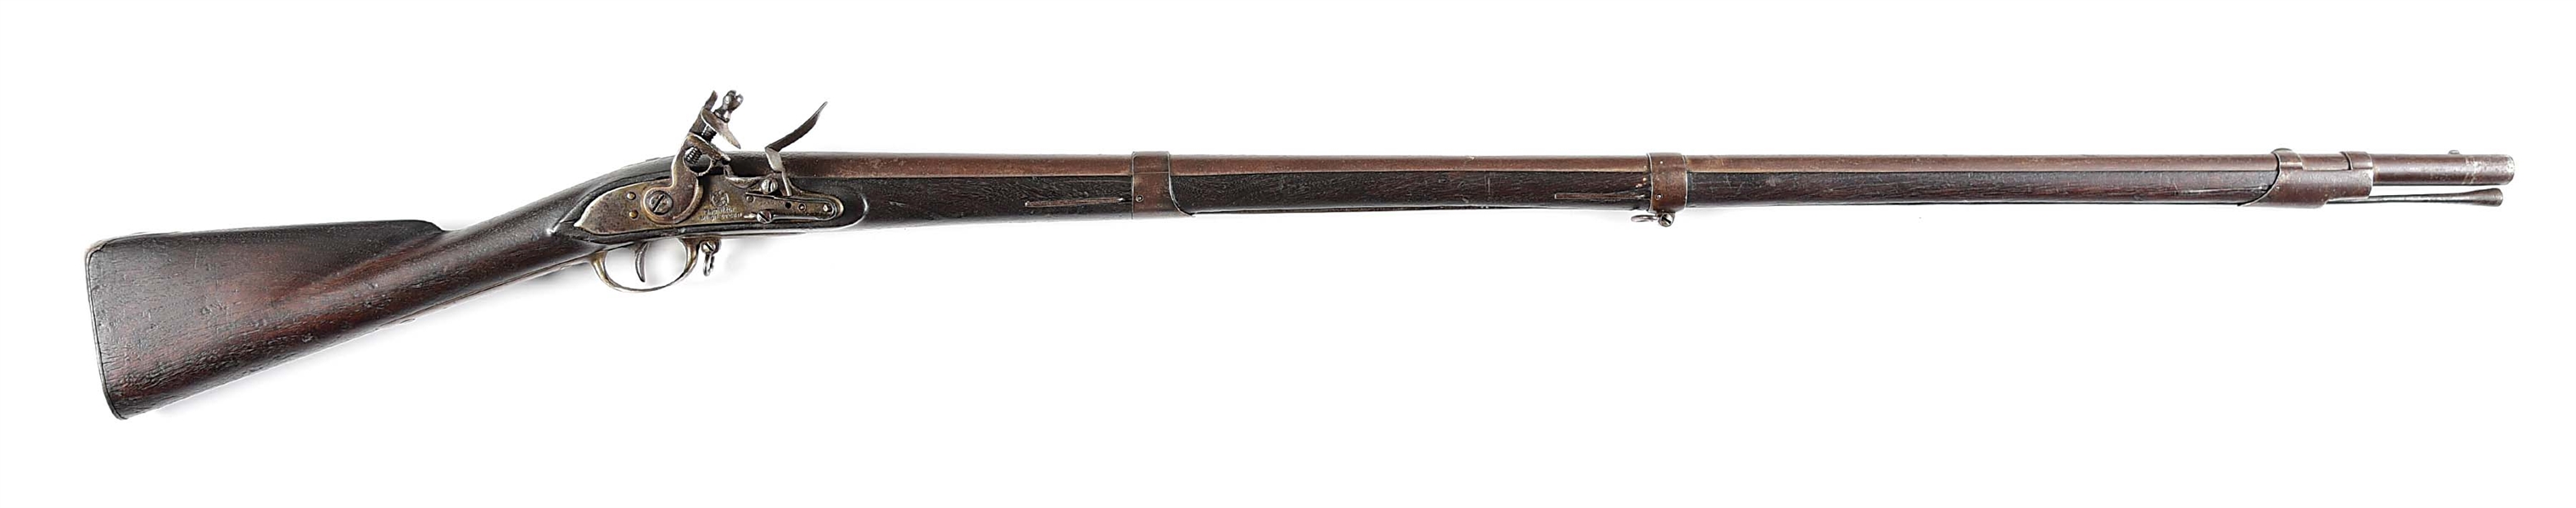 (A) OLIVER BIDWELL 1808 CONTRACT FLINTLOCK RIFLE.